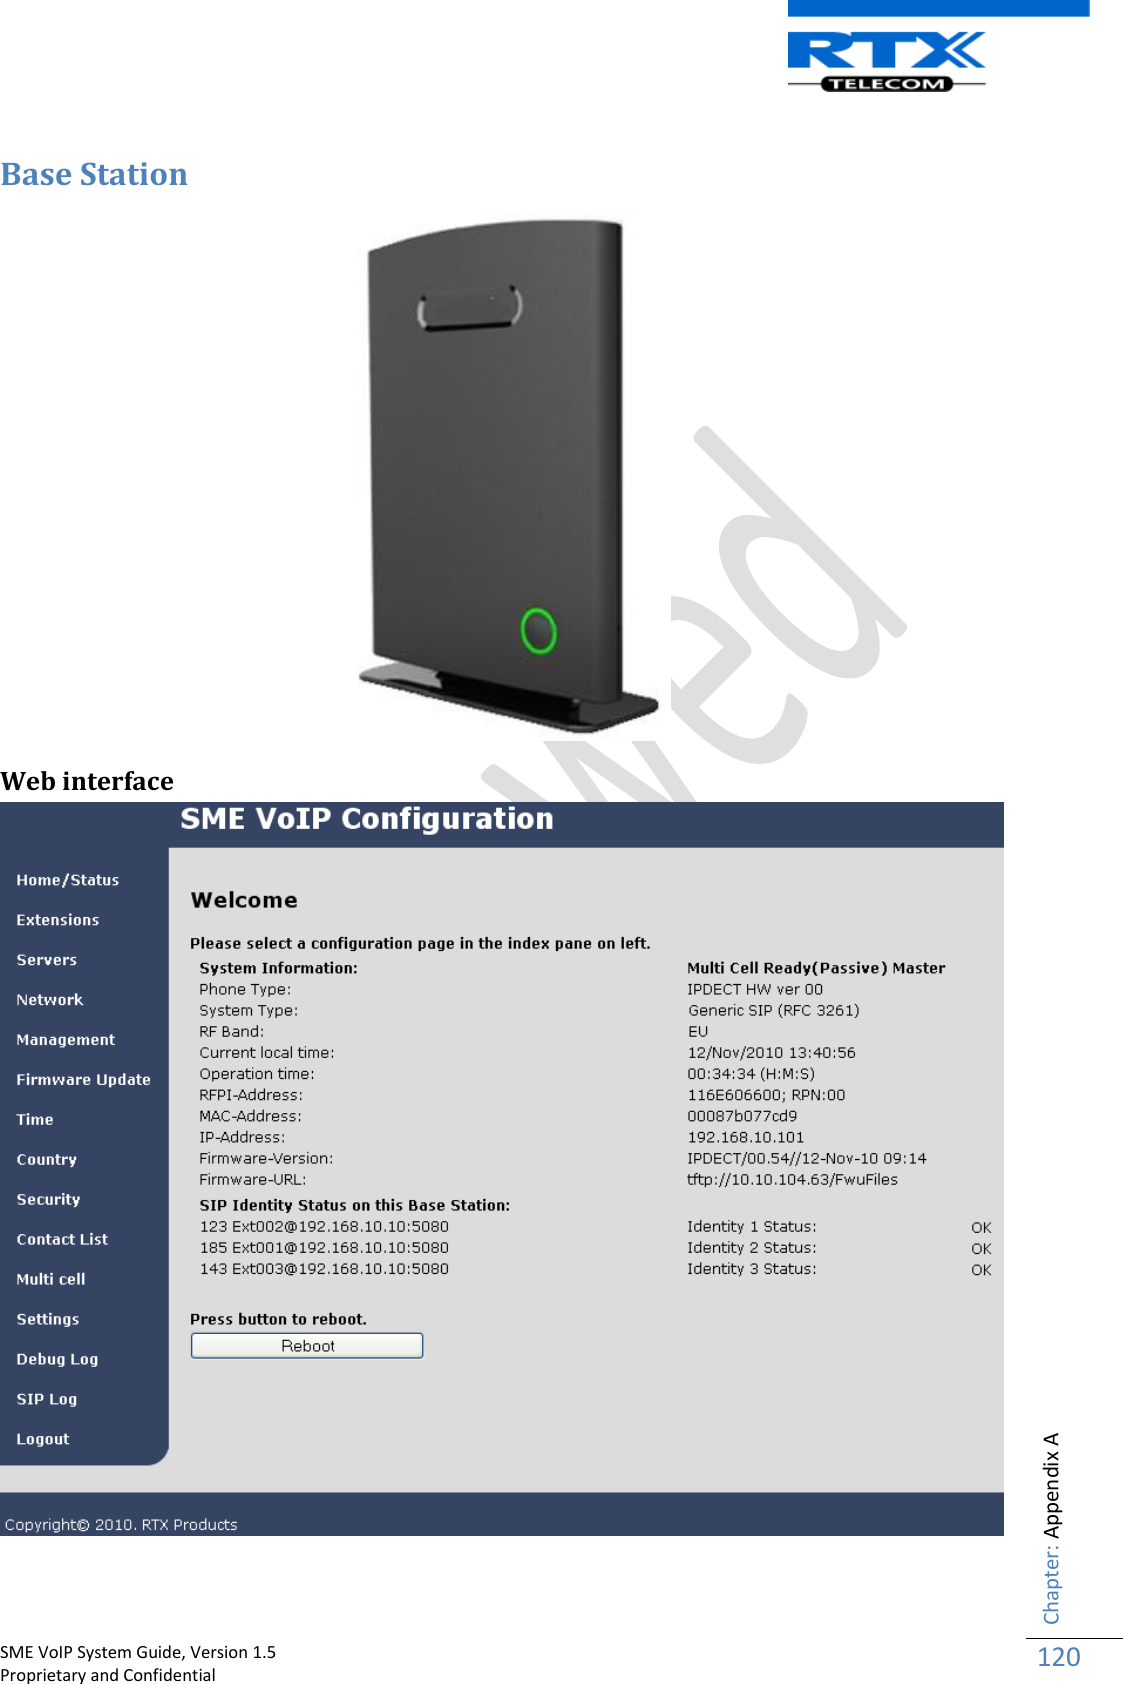    SME VoIP System Guide, Version 1.5                                                                                                                                                          Proprietary and Confidential    Chapter: Appendix A 120  Base Station  Web interface 